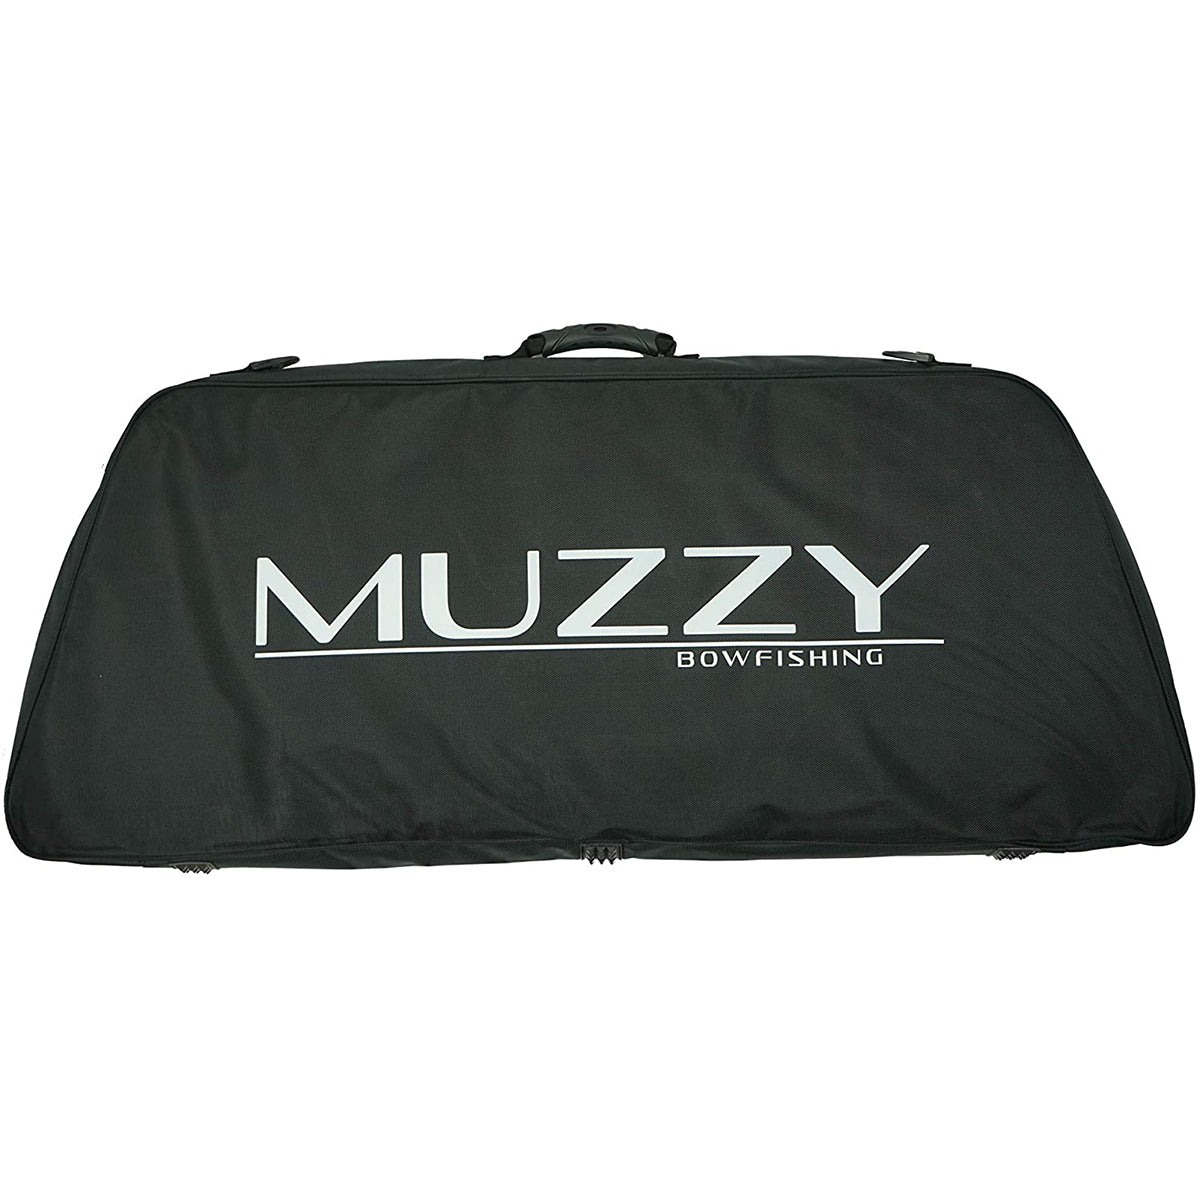 Muzzy Bowfishing Soft-Sided Bow Carrying Case